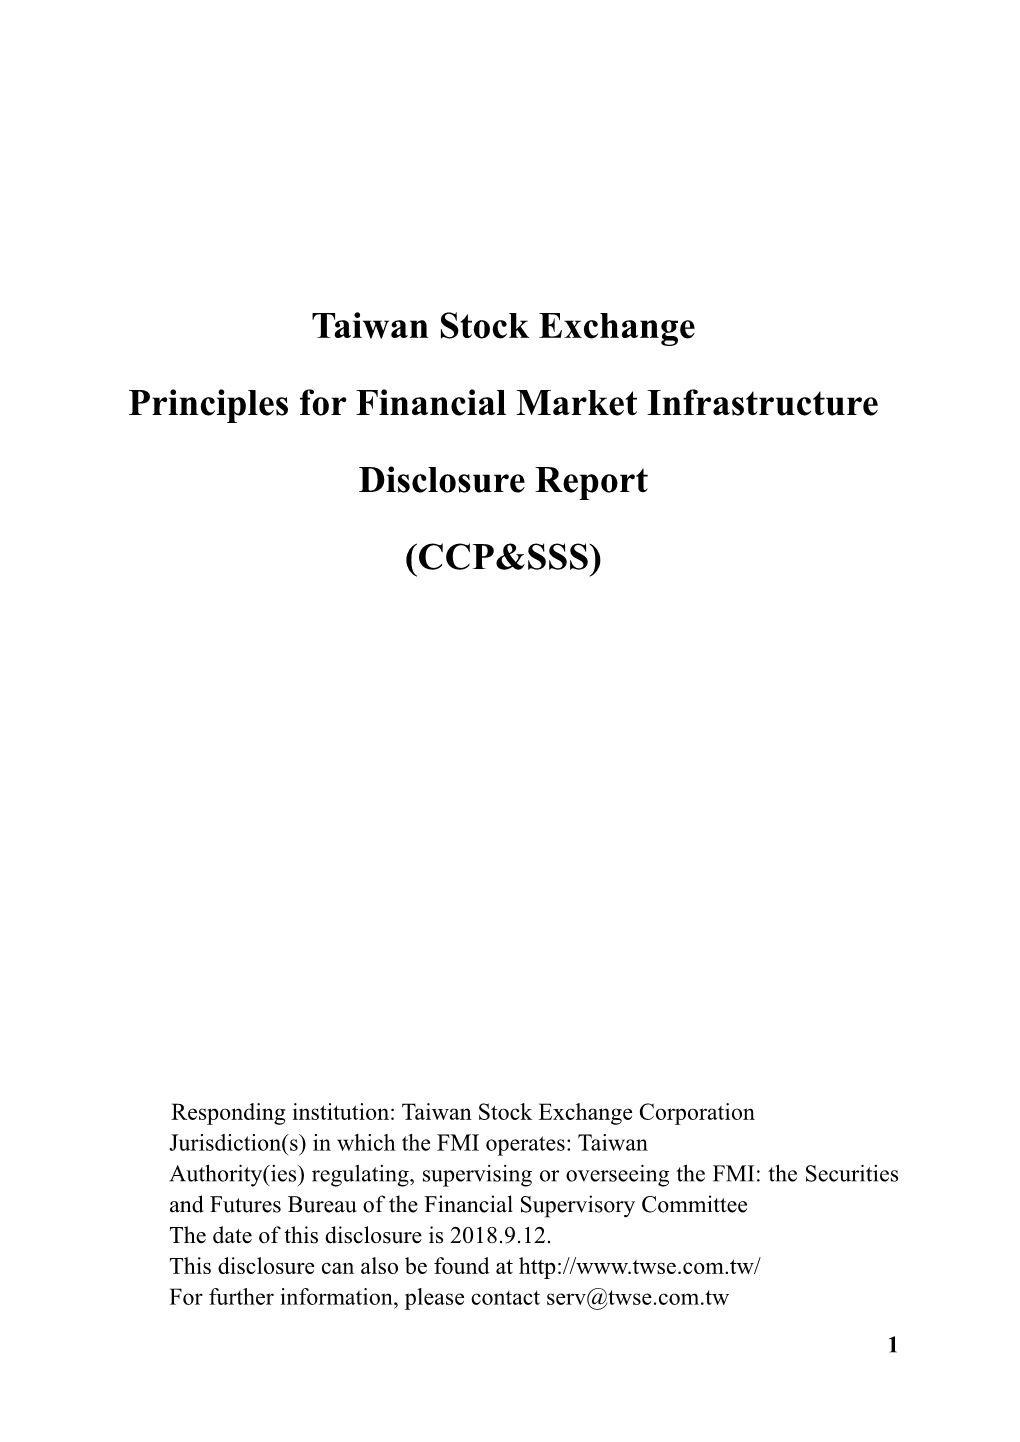 Taiwan Stock Exchange Principles for Financial Market Infrastructure